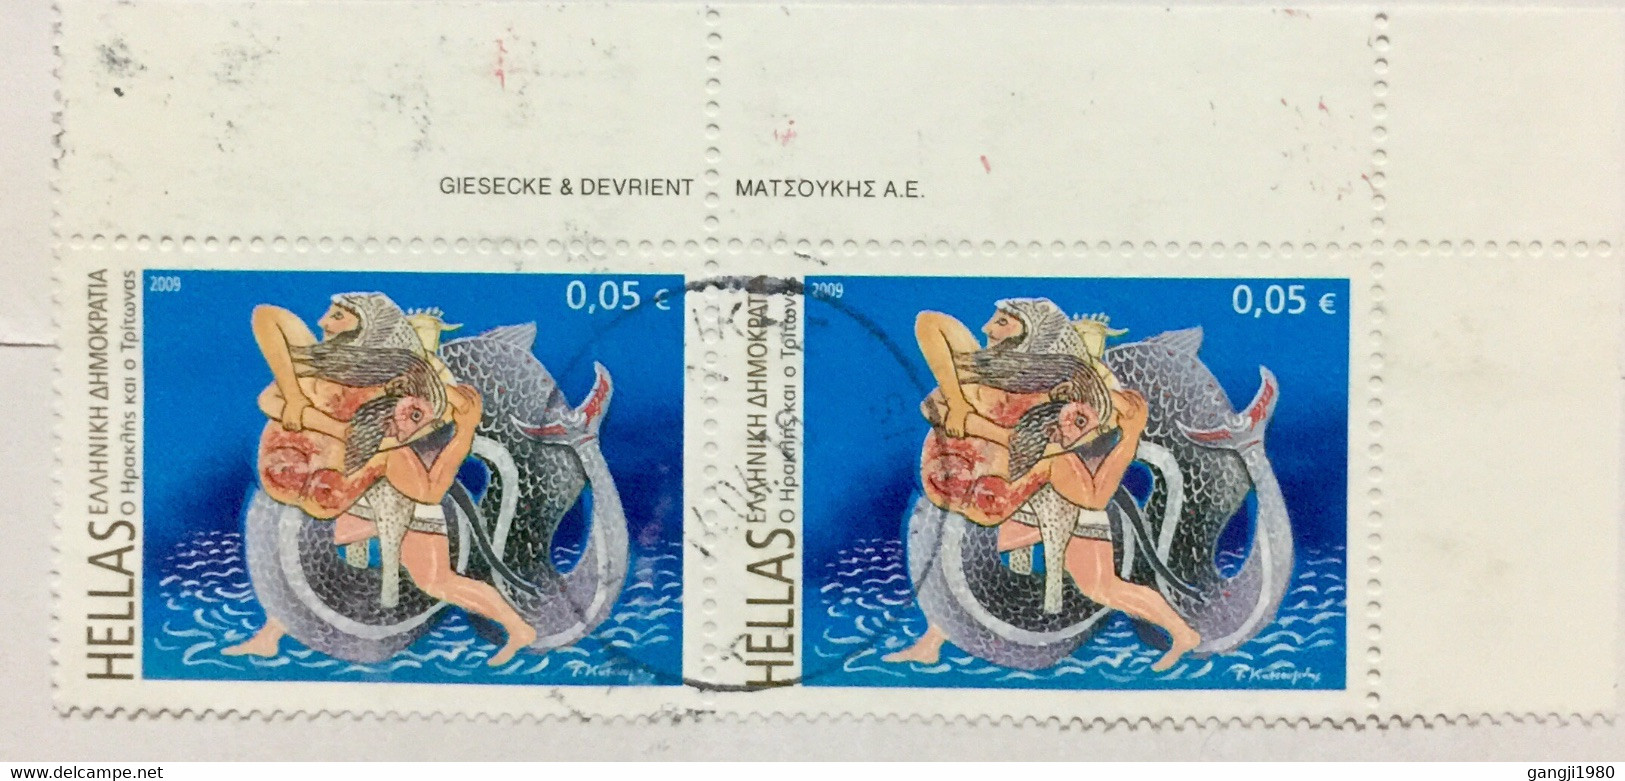 GREECE 2009, USED 4 STAMPS REGISTERED COVER TO U.K ,SHIP BALLON ,EUROPA,ART ,FISH,MAN ,WOMEN,PAINTING ART ,SEA ,WATER ,T - Cartas & Documentos